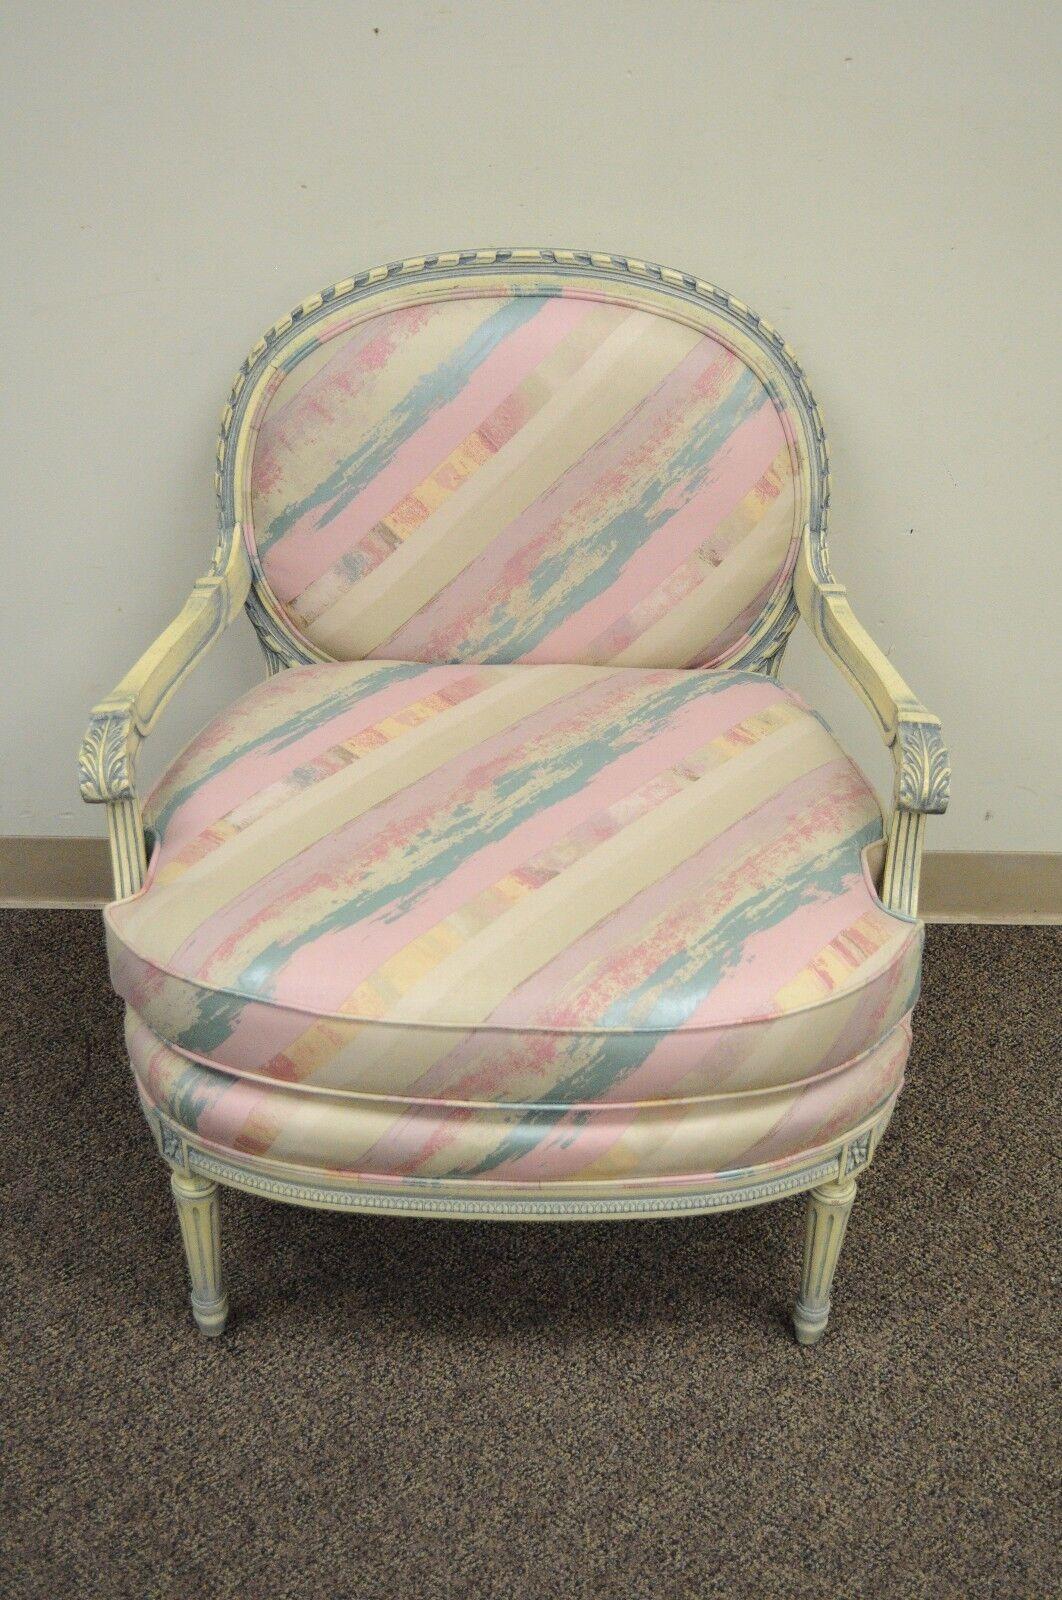 20th Century Vtg French Louis XVI Style Pink Blue Carved Bergere Boudoir Lounge Arm Chair For Sale